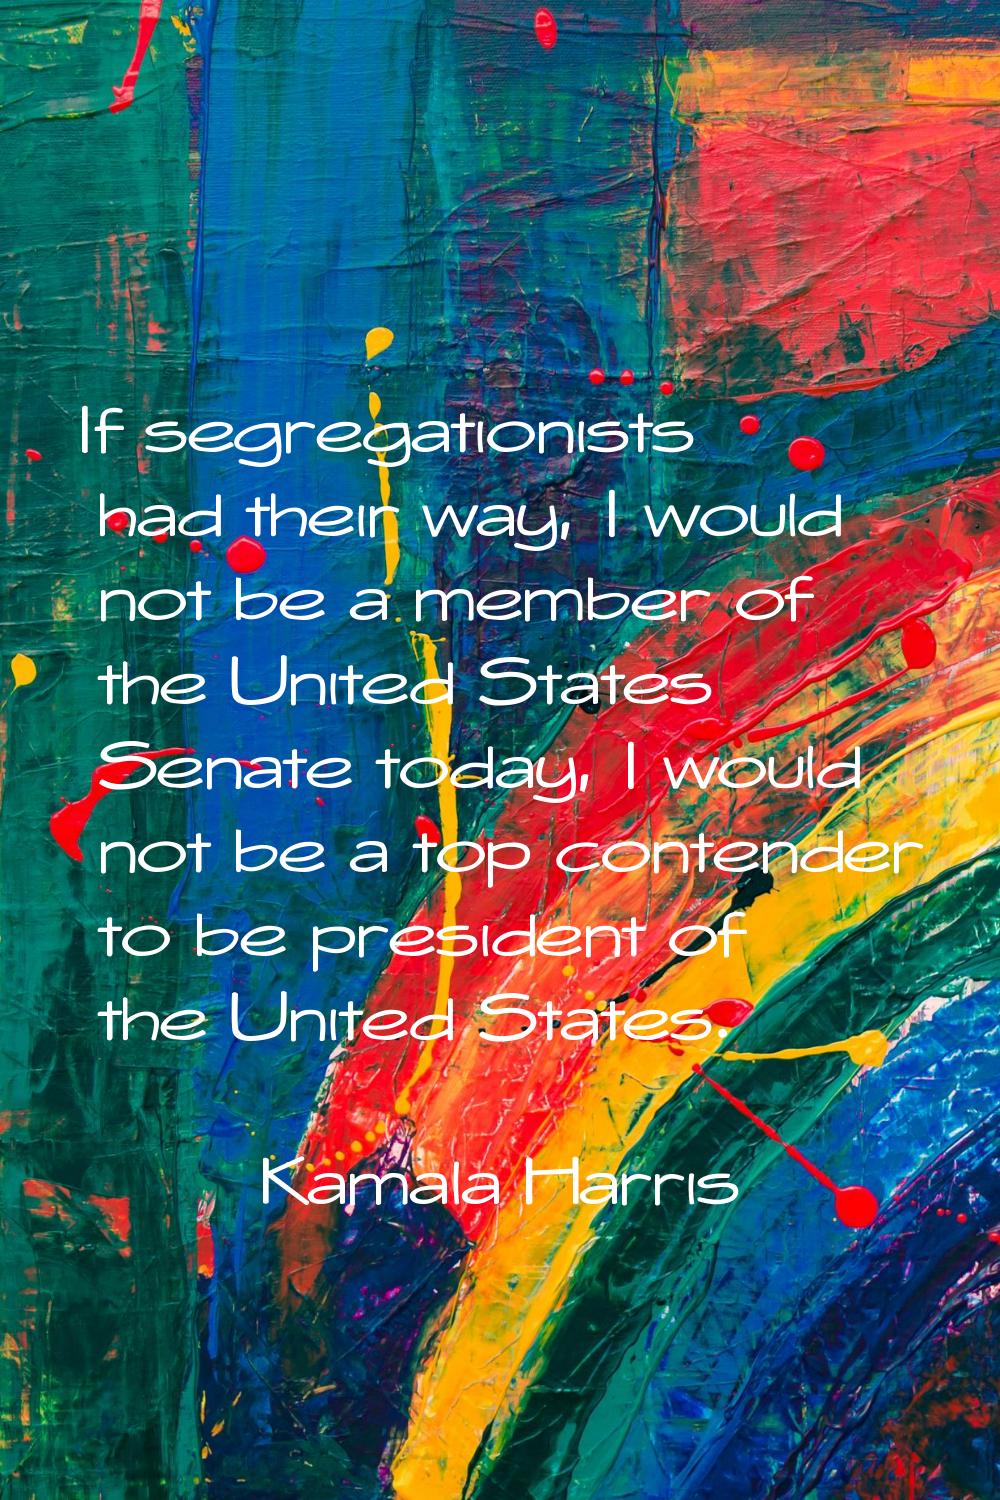 If segregationists had their way, I would not be a member of the United States Senate today, I woul